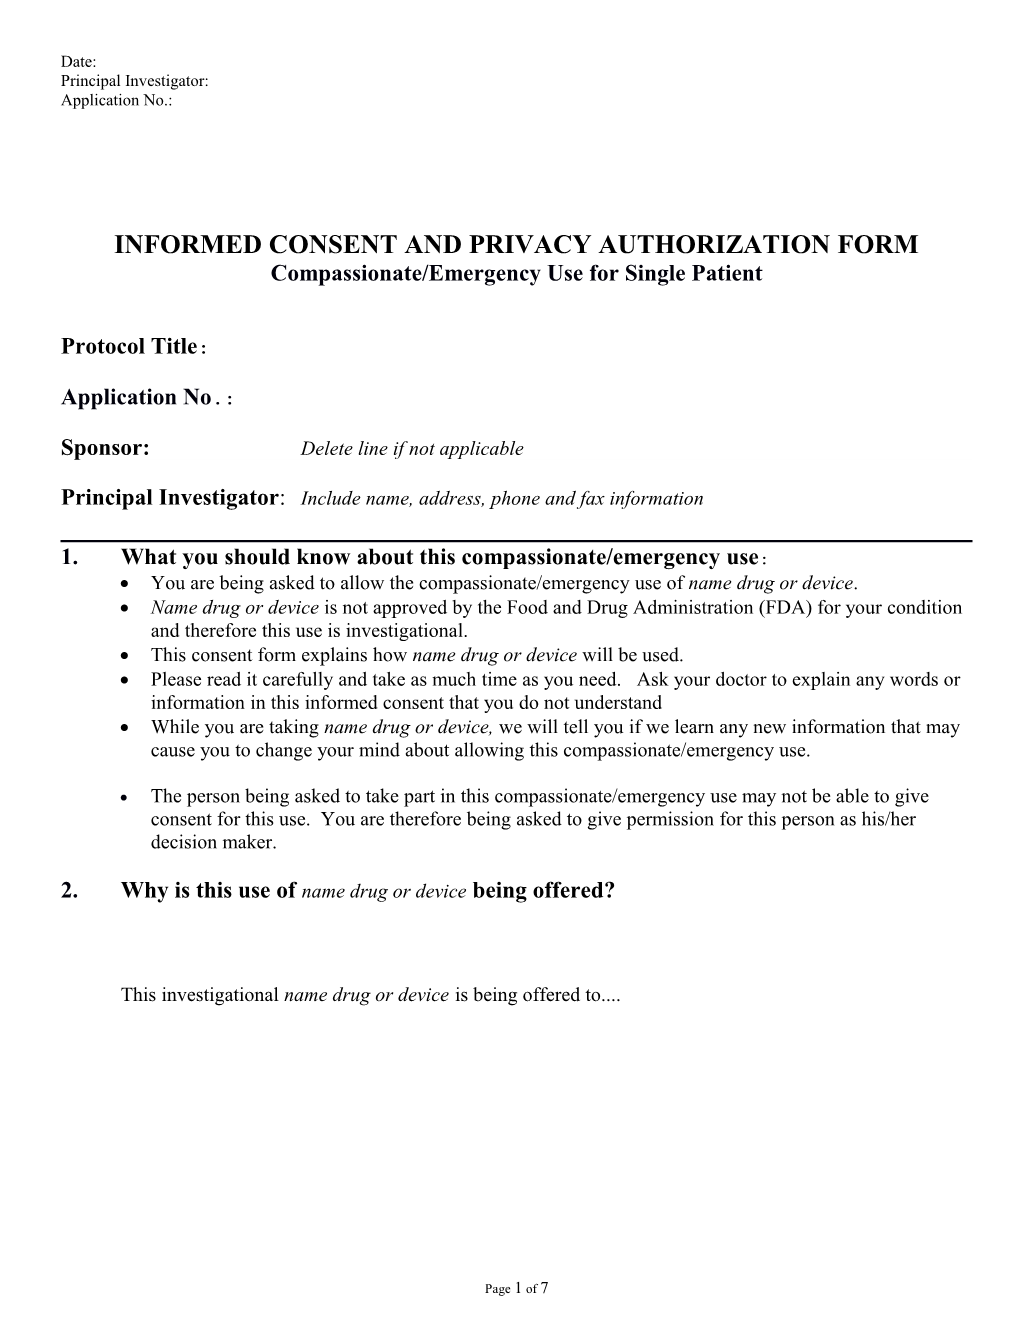 Informed Consent and Privacy Authorization Form